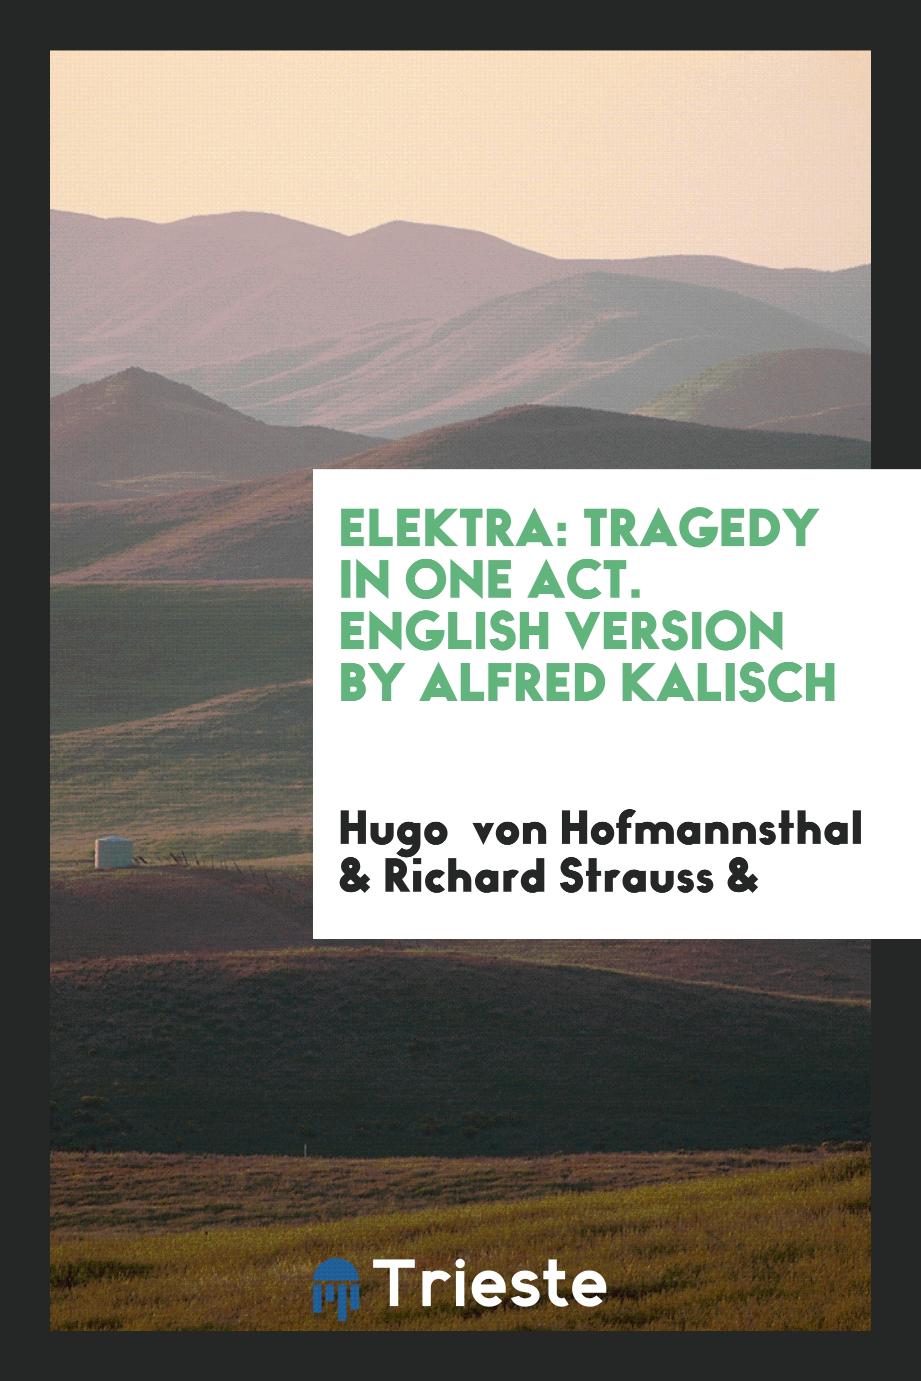 Elektra: Tragedy in One Act. English Version by Alfred Kalisch